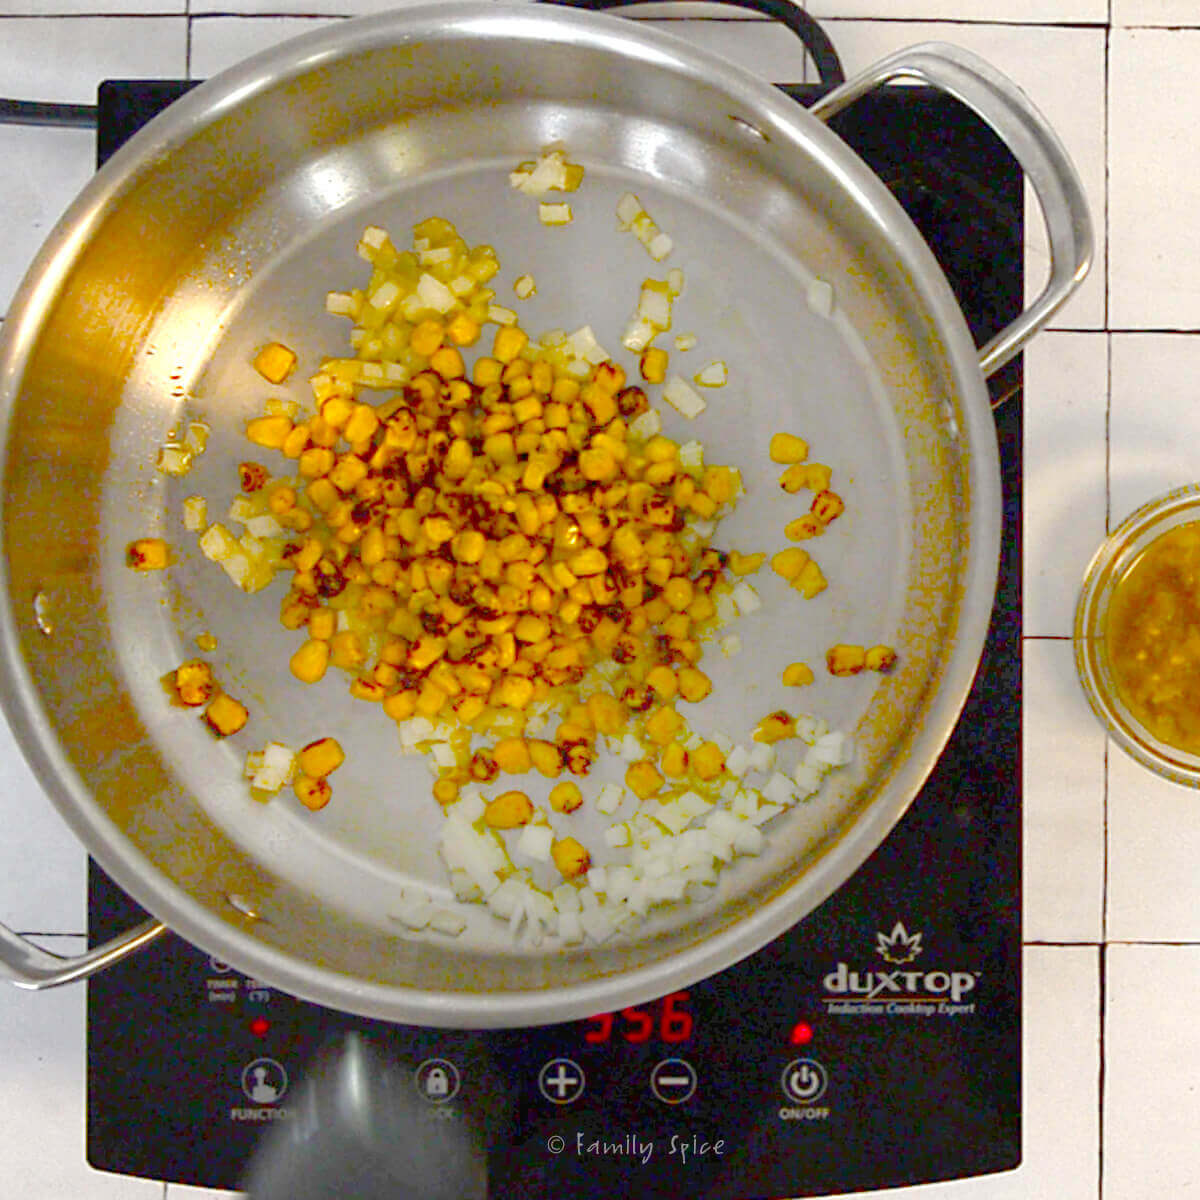 A stainless pot with sautéed onions and corn in it